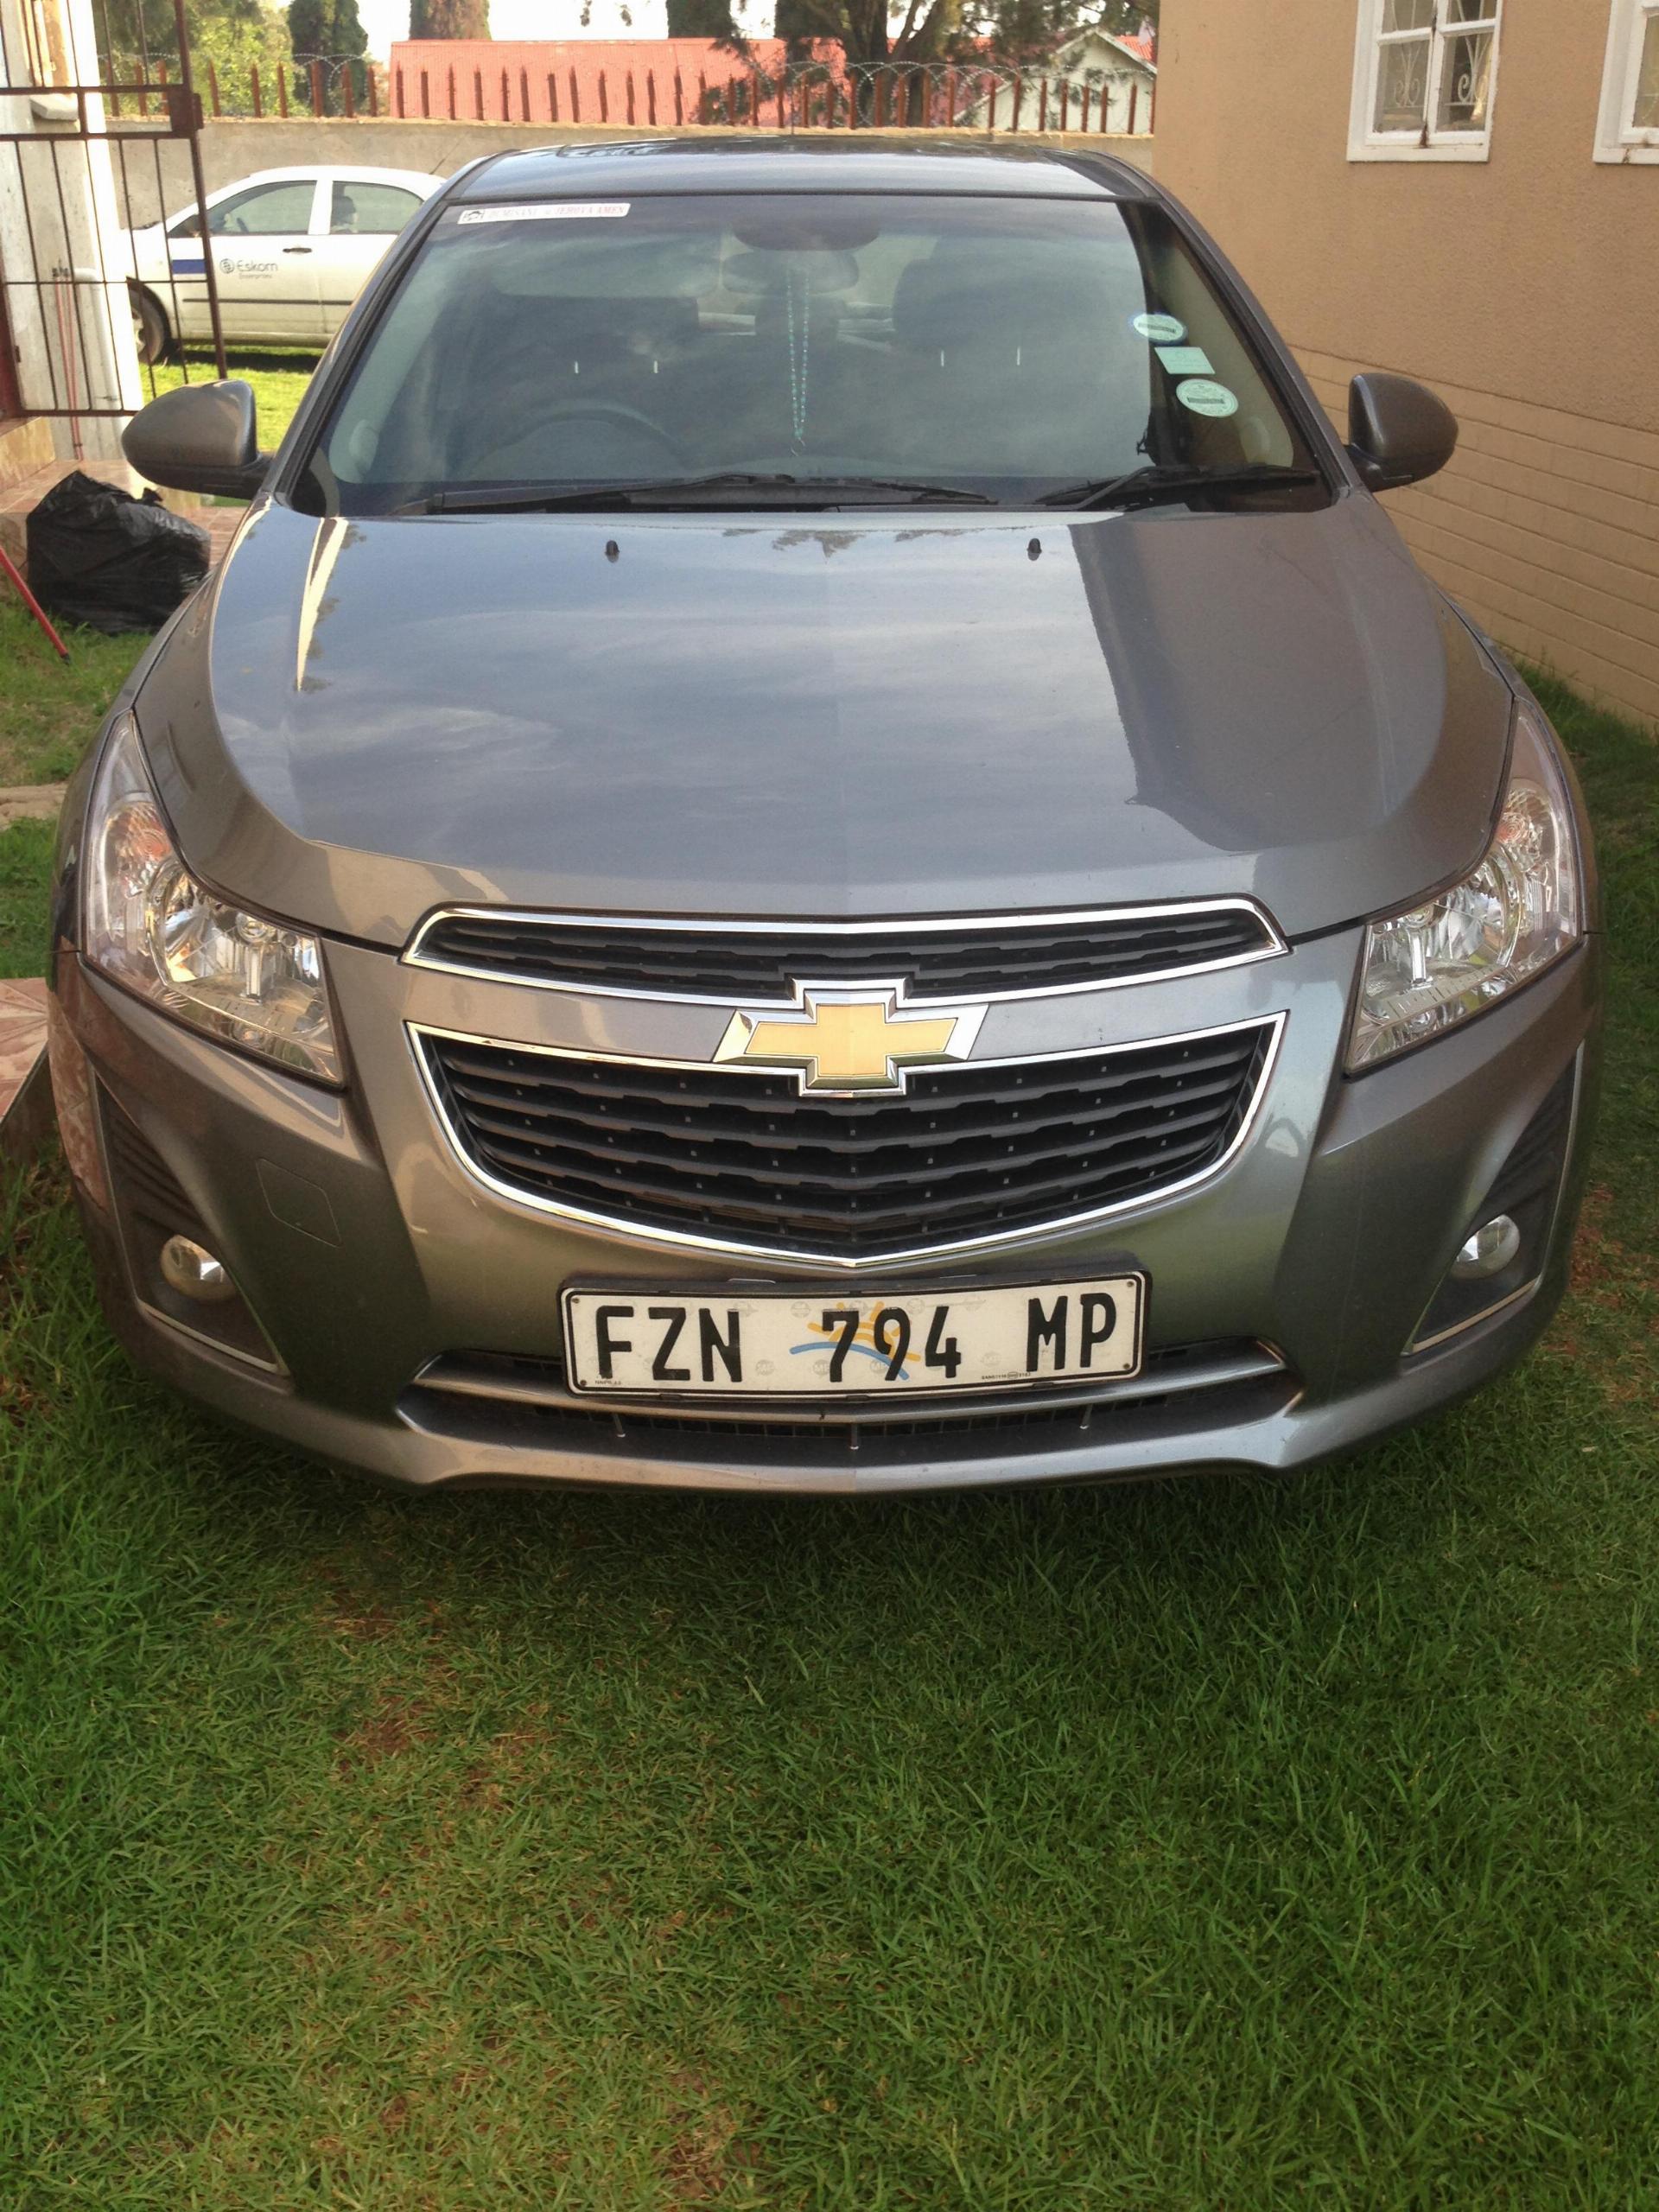 Used Chevrolet Cruze 1.6 LS 2013 on auction PV1009332